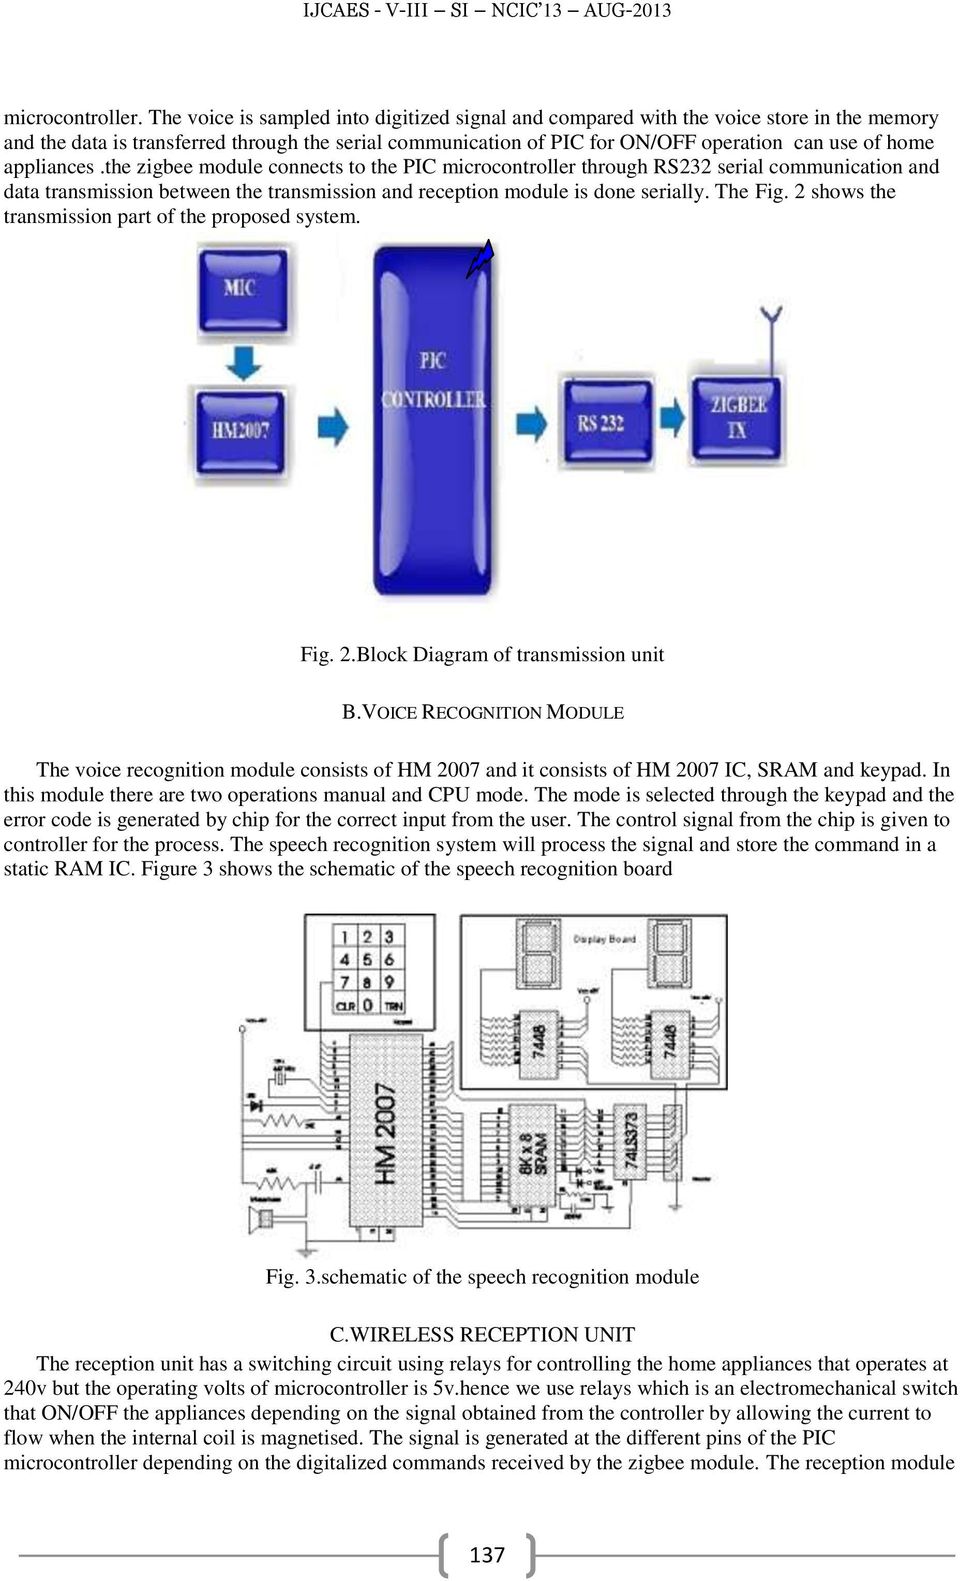 appliances.the zigbee module connects to the PIC microcontroller through RS232 serial communication and data transmission between the transmission and reception module is done serially. The Fig.